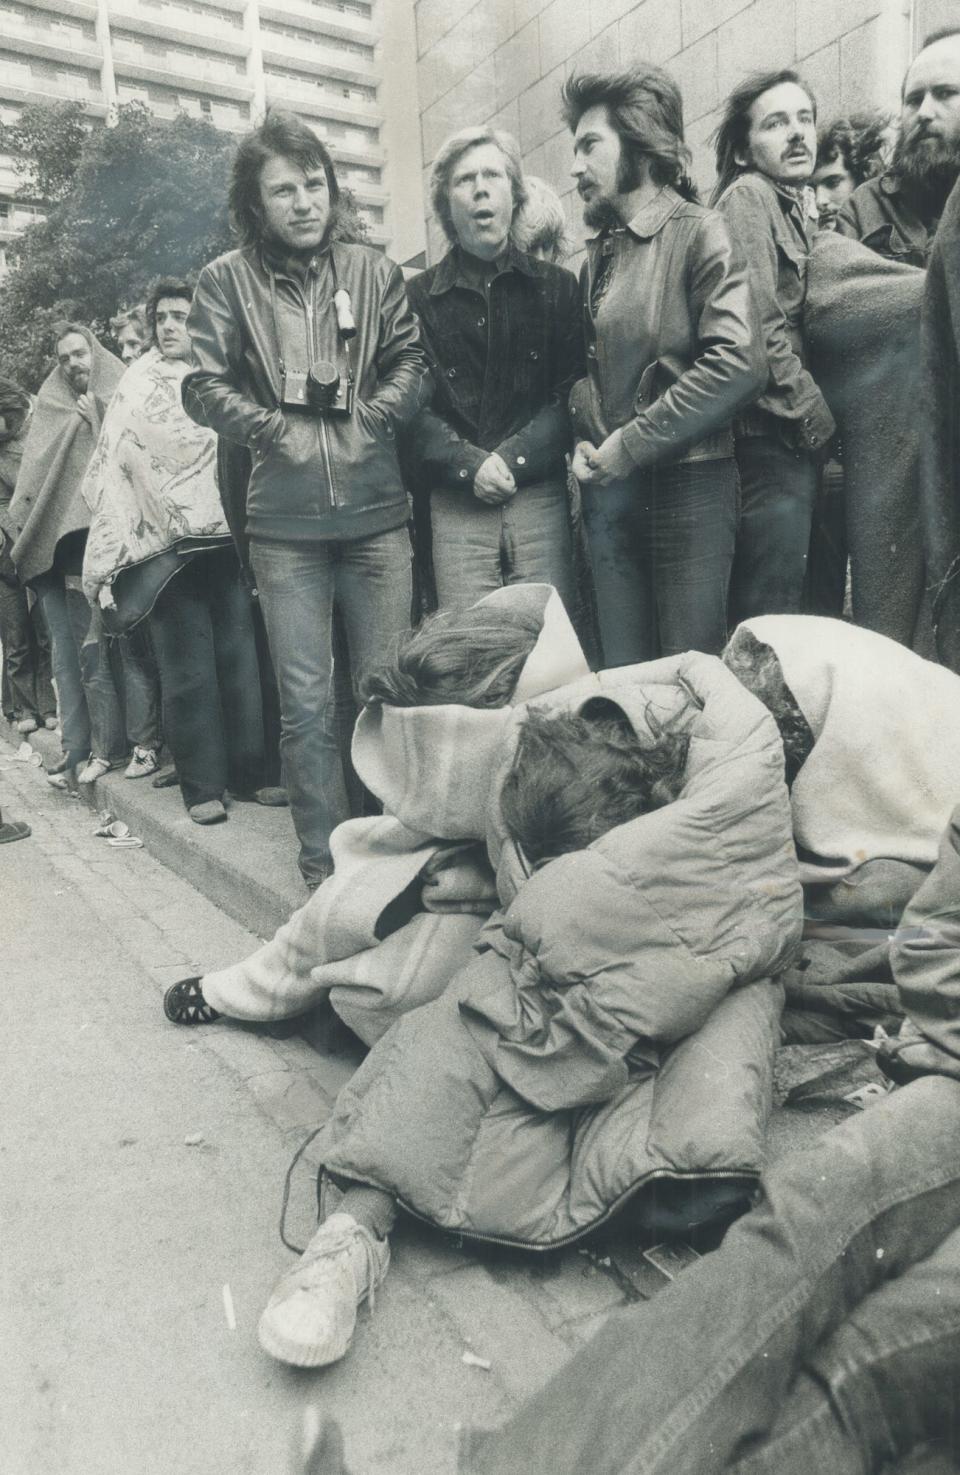 Canadian fans of The Rolling Stones wait in line to buy concert tickets in 1972.